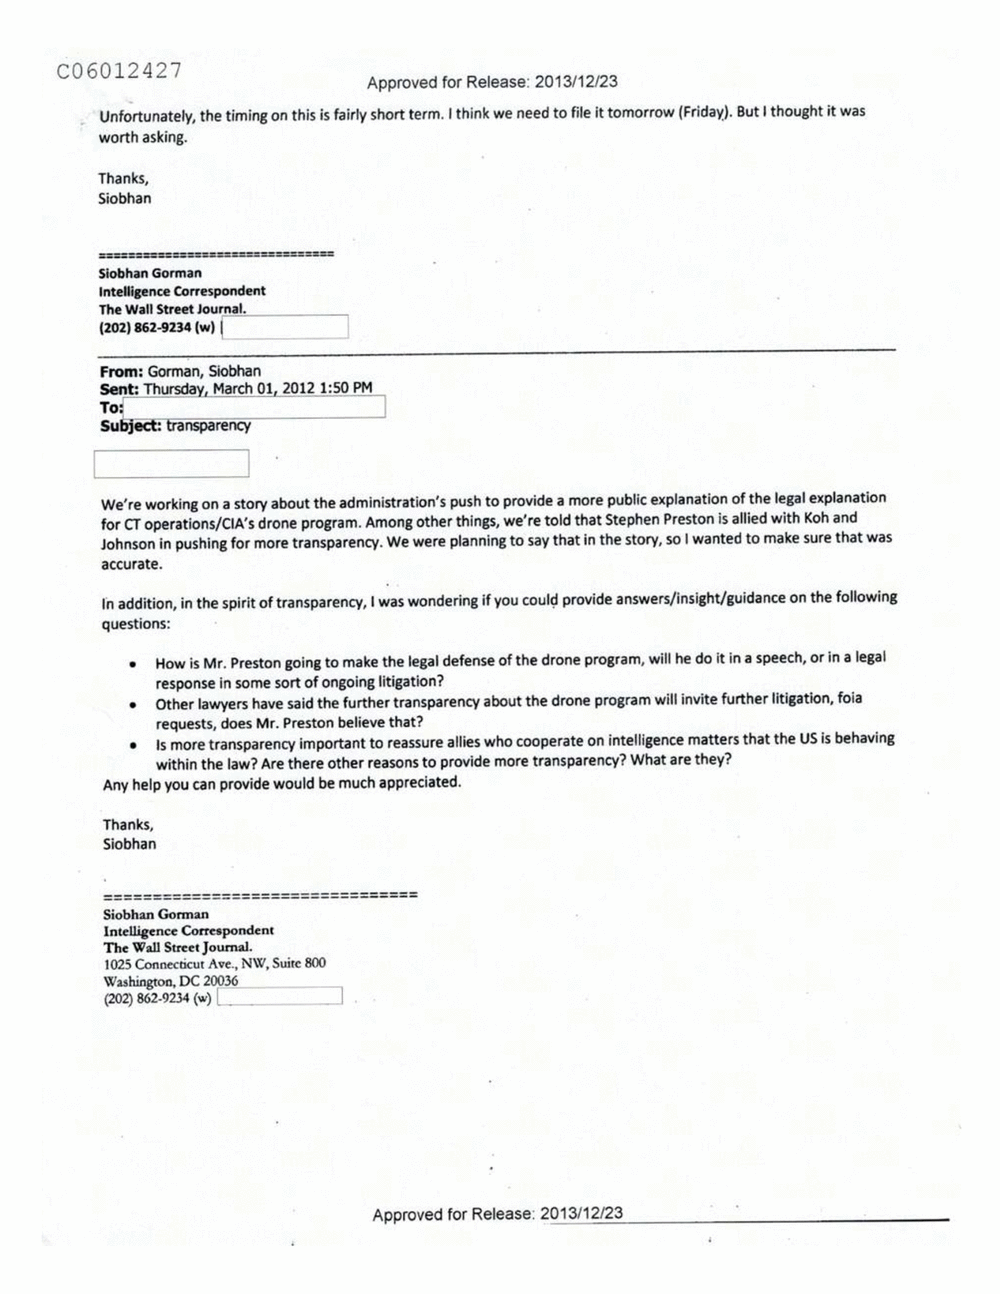 Page 2 from Email Correspondence Between Reporters and CIA Flacks